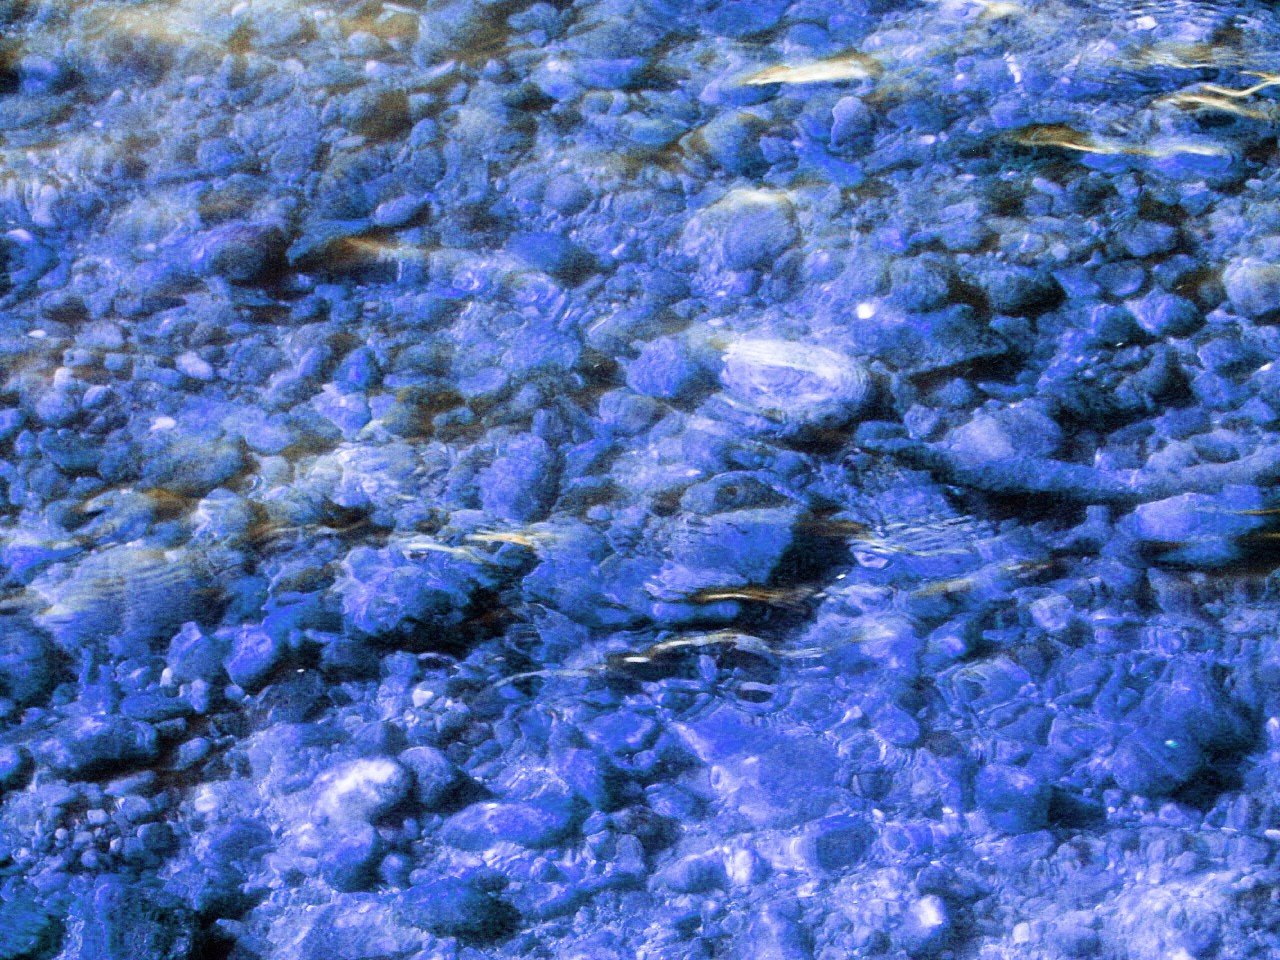 a view of bubbles in water at the bottom of some rocks